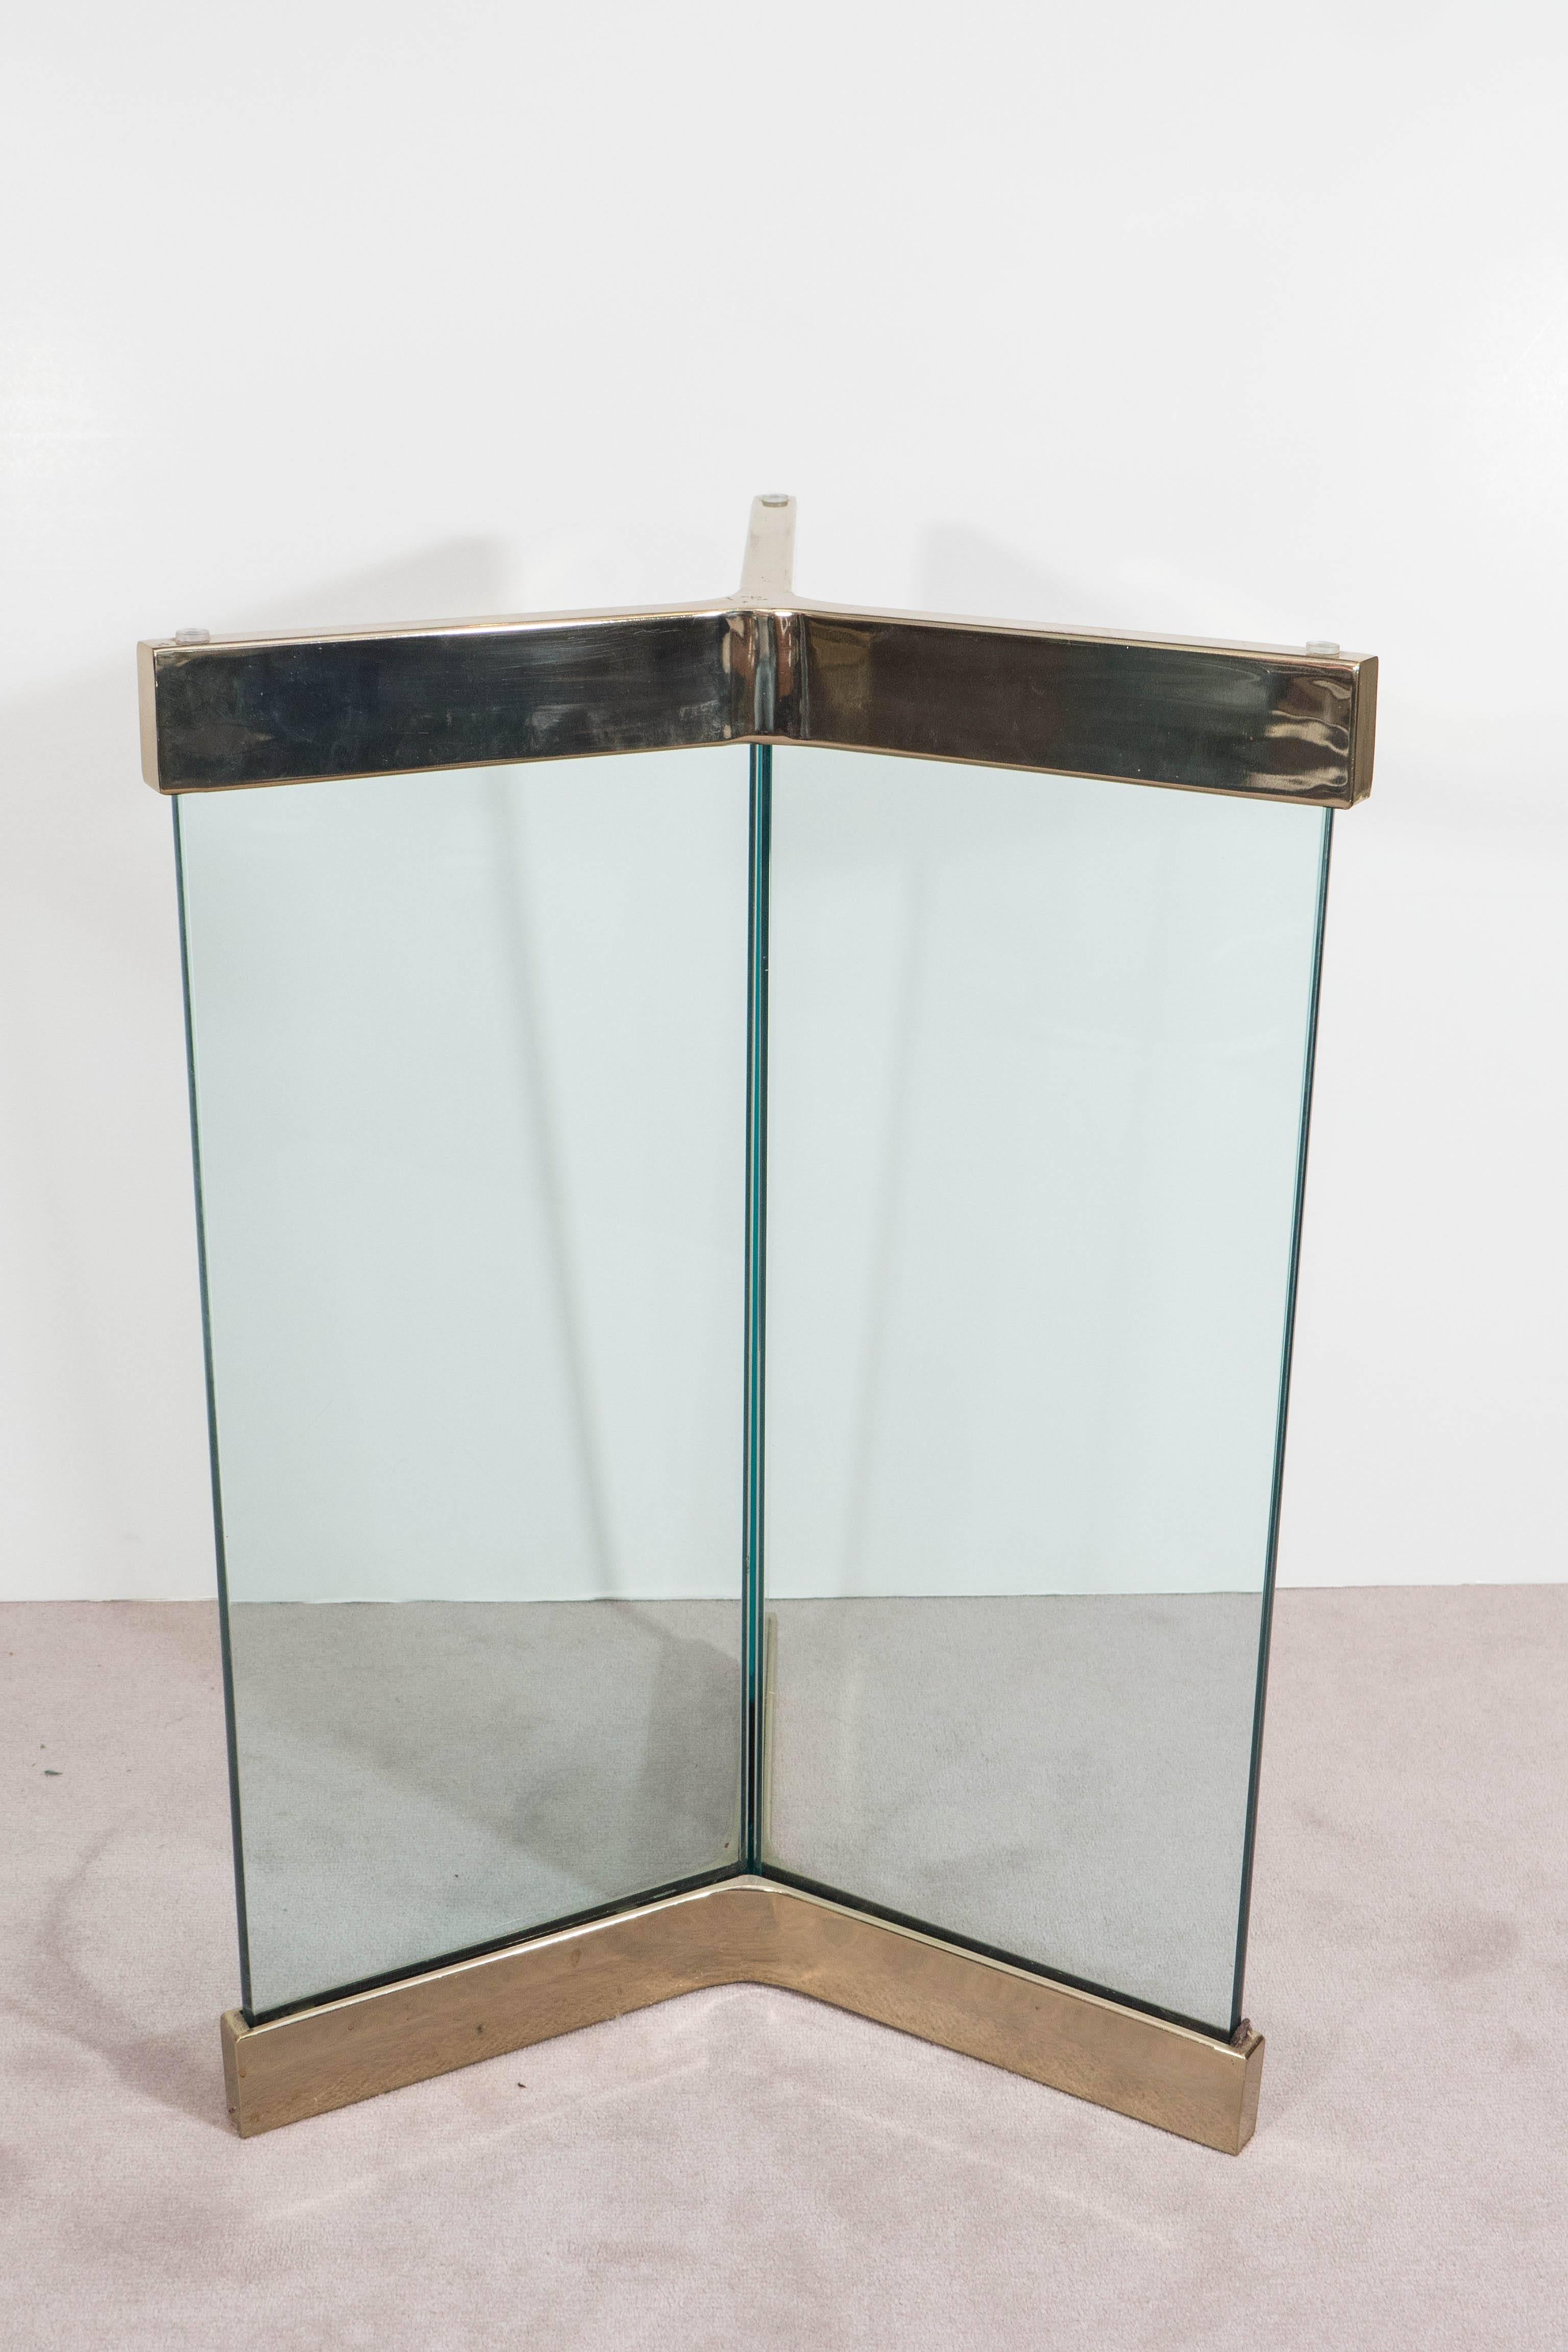 Late 20th Century Pair of Leon Rosen Glass and Brass Dining Table Bases for Pace Collection